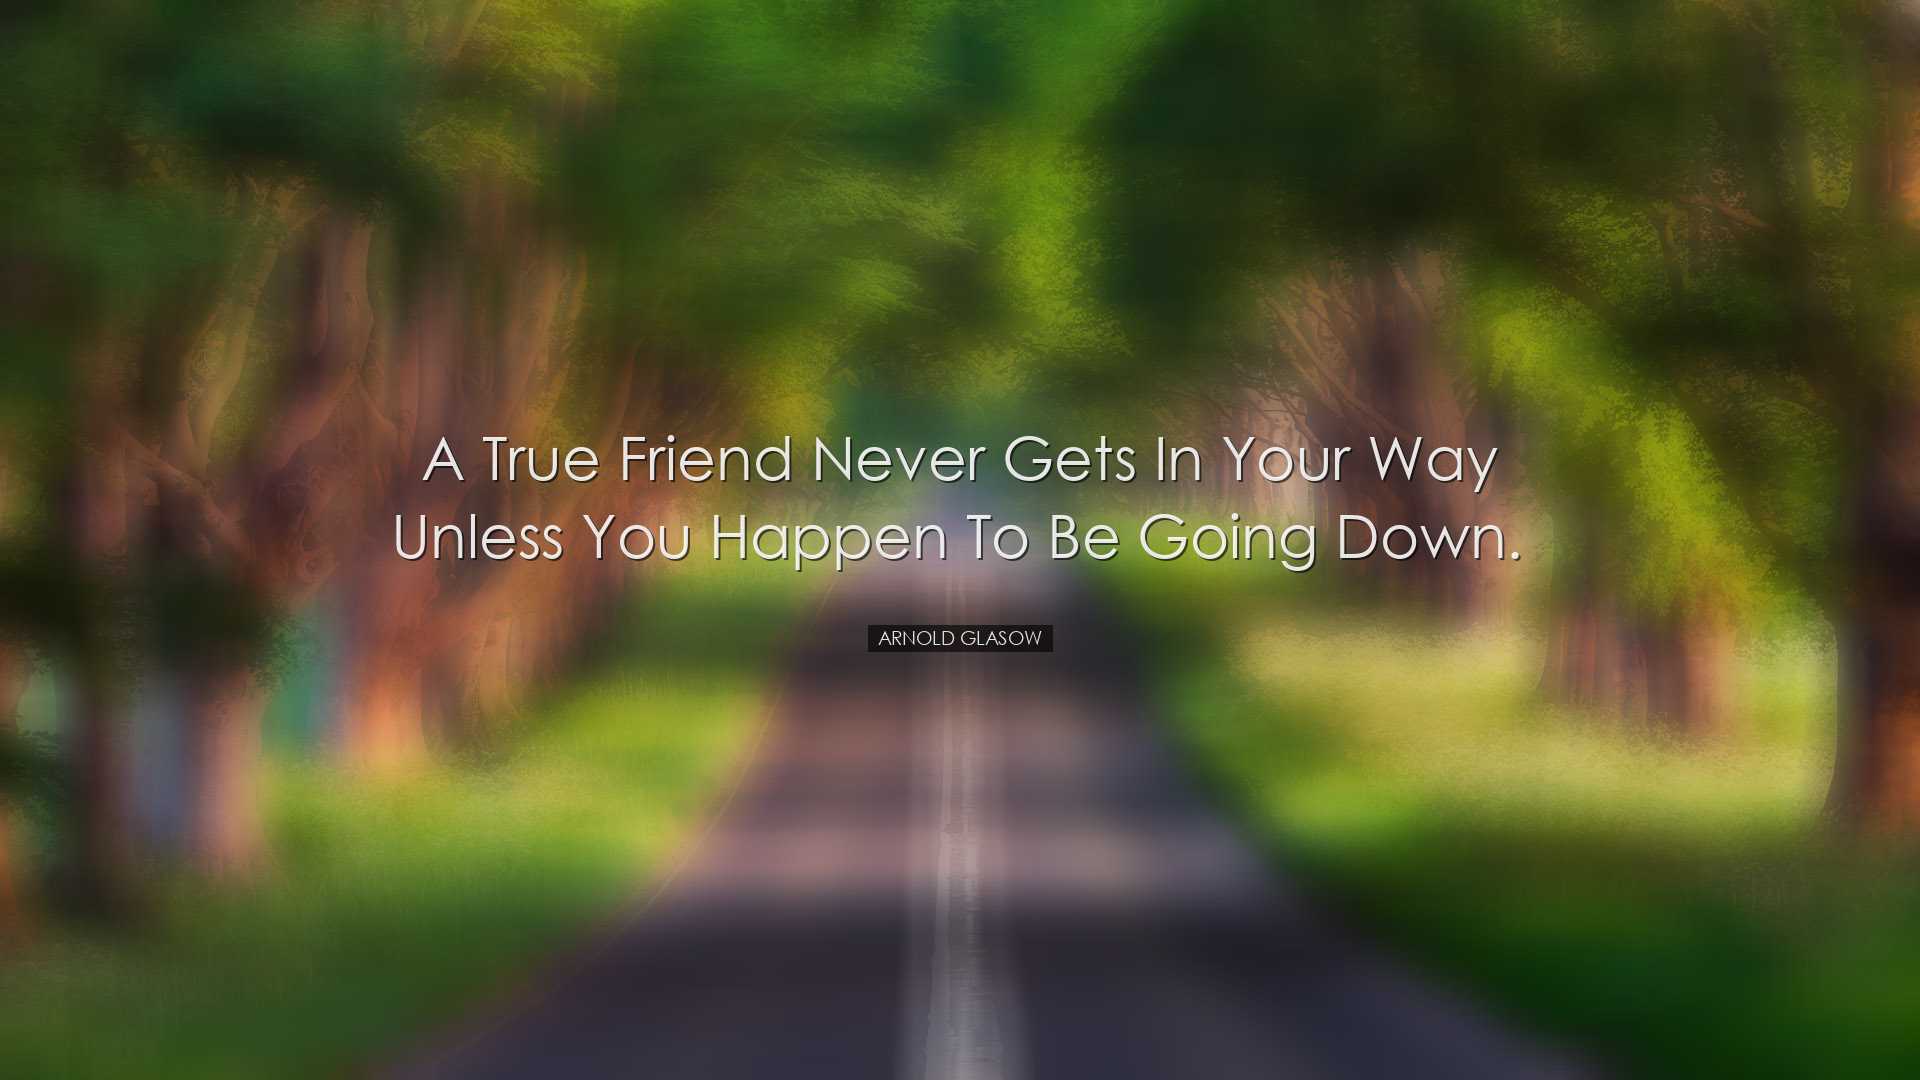 A true friend never gets in your way unless you happen to be going